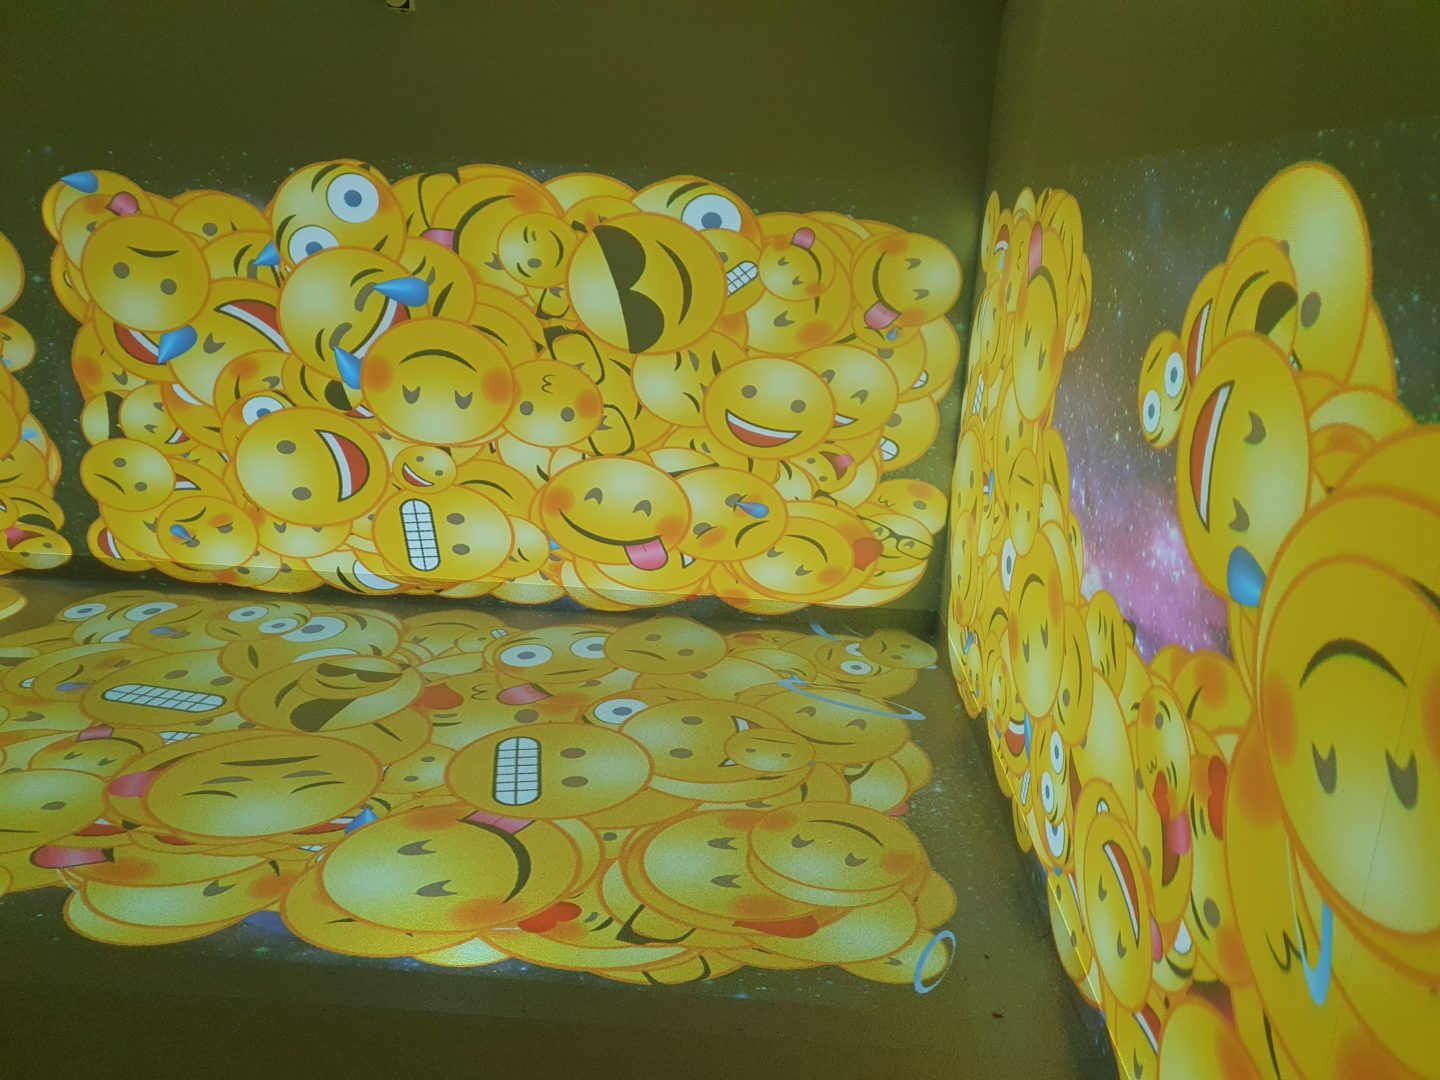 fully interactive immersive room including 2 interactive walls and 1 interactive floor. displaying the emoji scatter activity to enhance sensory stimulation